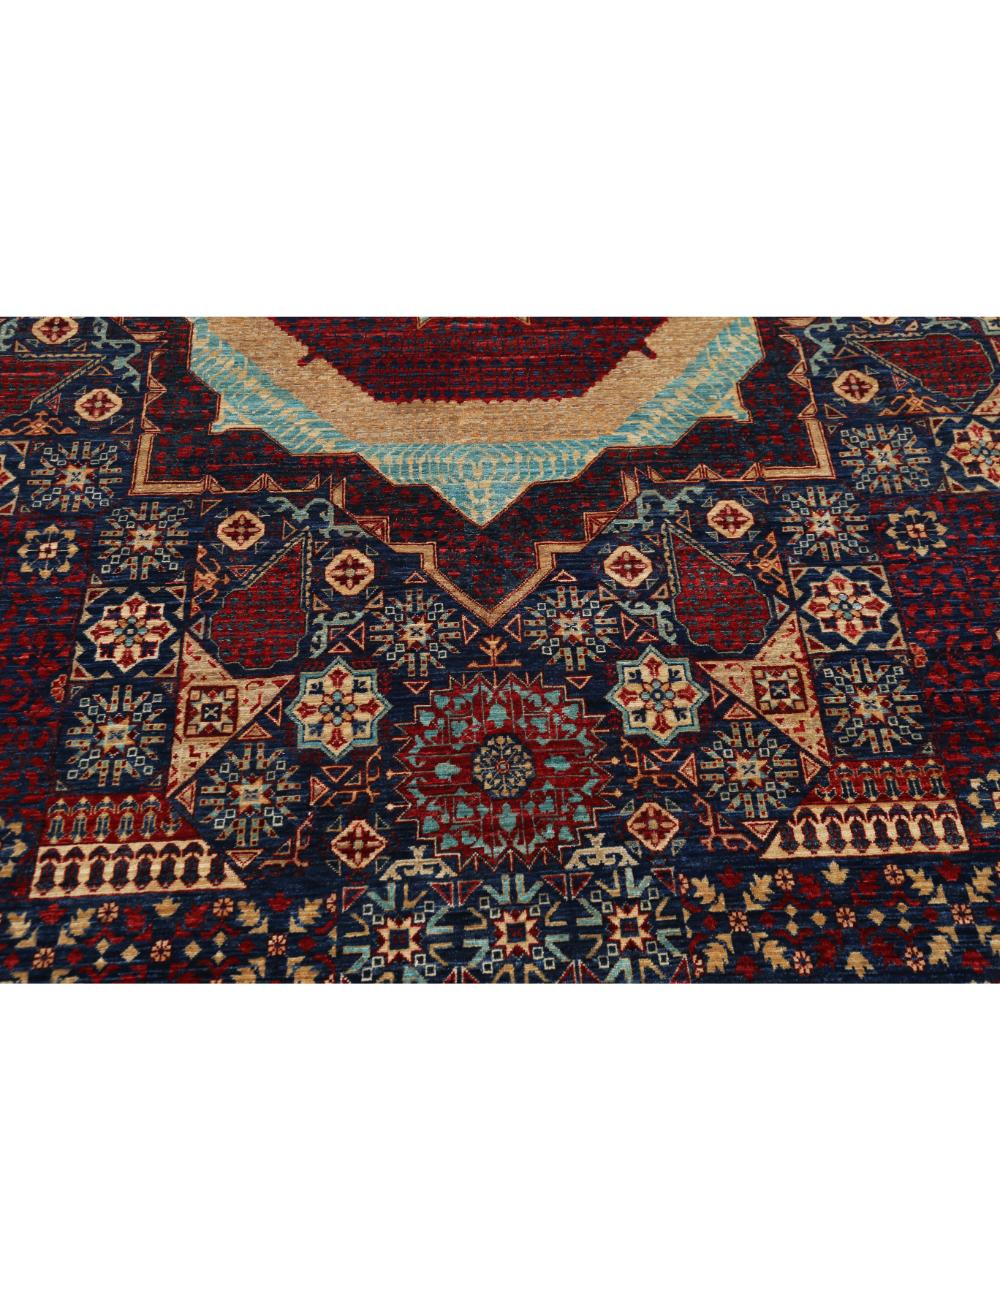 Mamluk 9' 10" X 14' 7" Hand-Knotted Wool Rug 9' 10" X 14' 7" (300 X 445) / Blue / Red